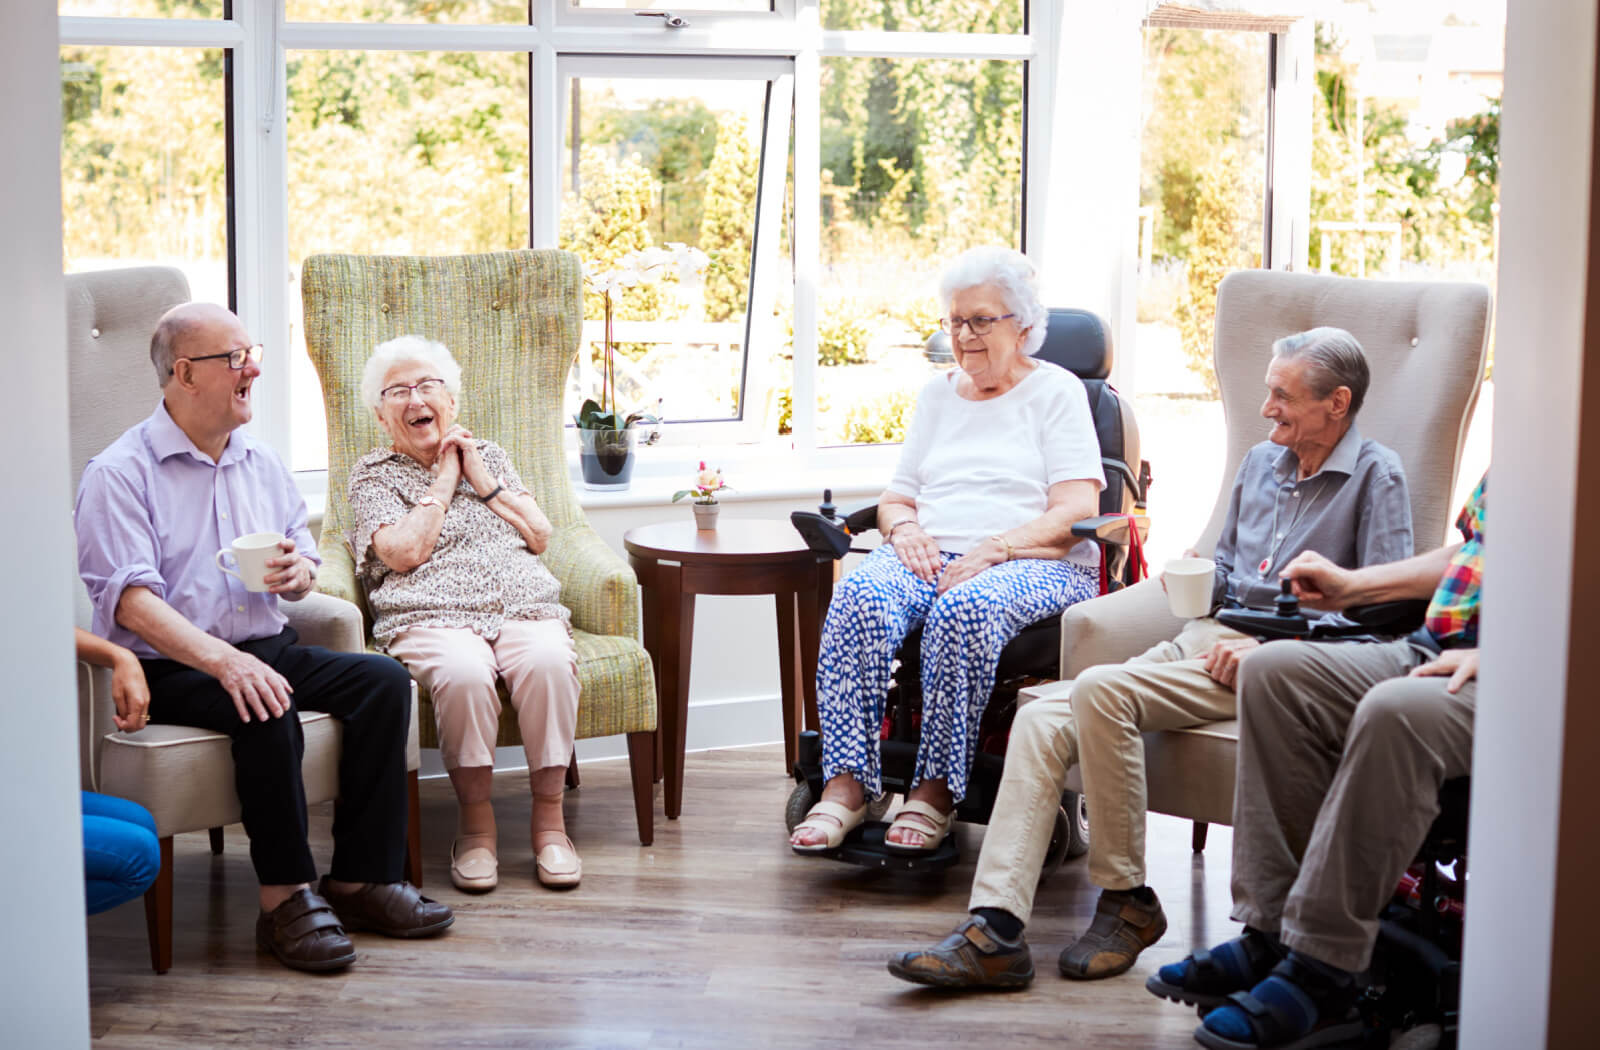 A group of seniors sitting talking to each other and having a cup of tea in a home care setting.